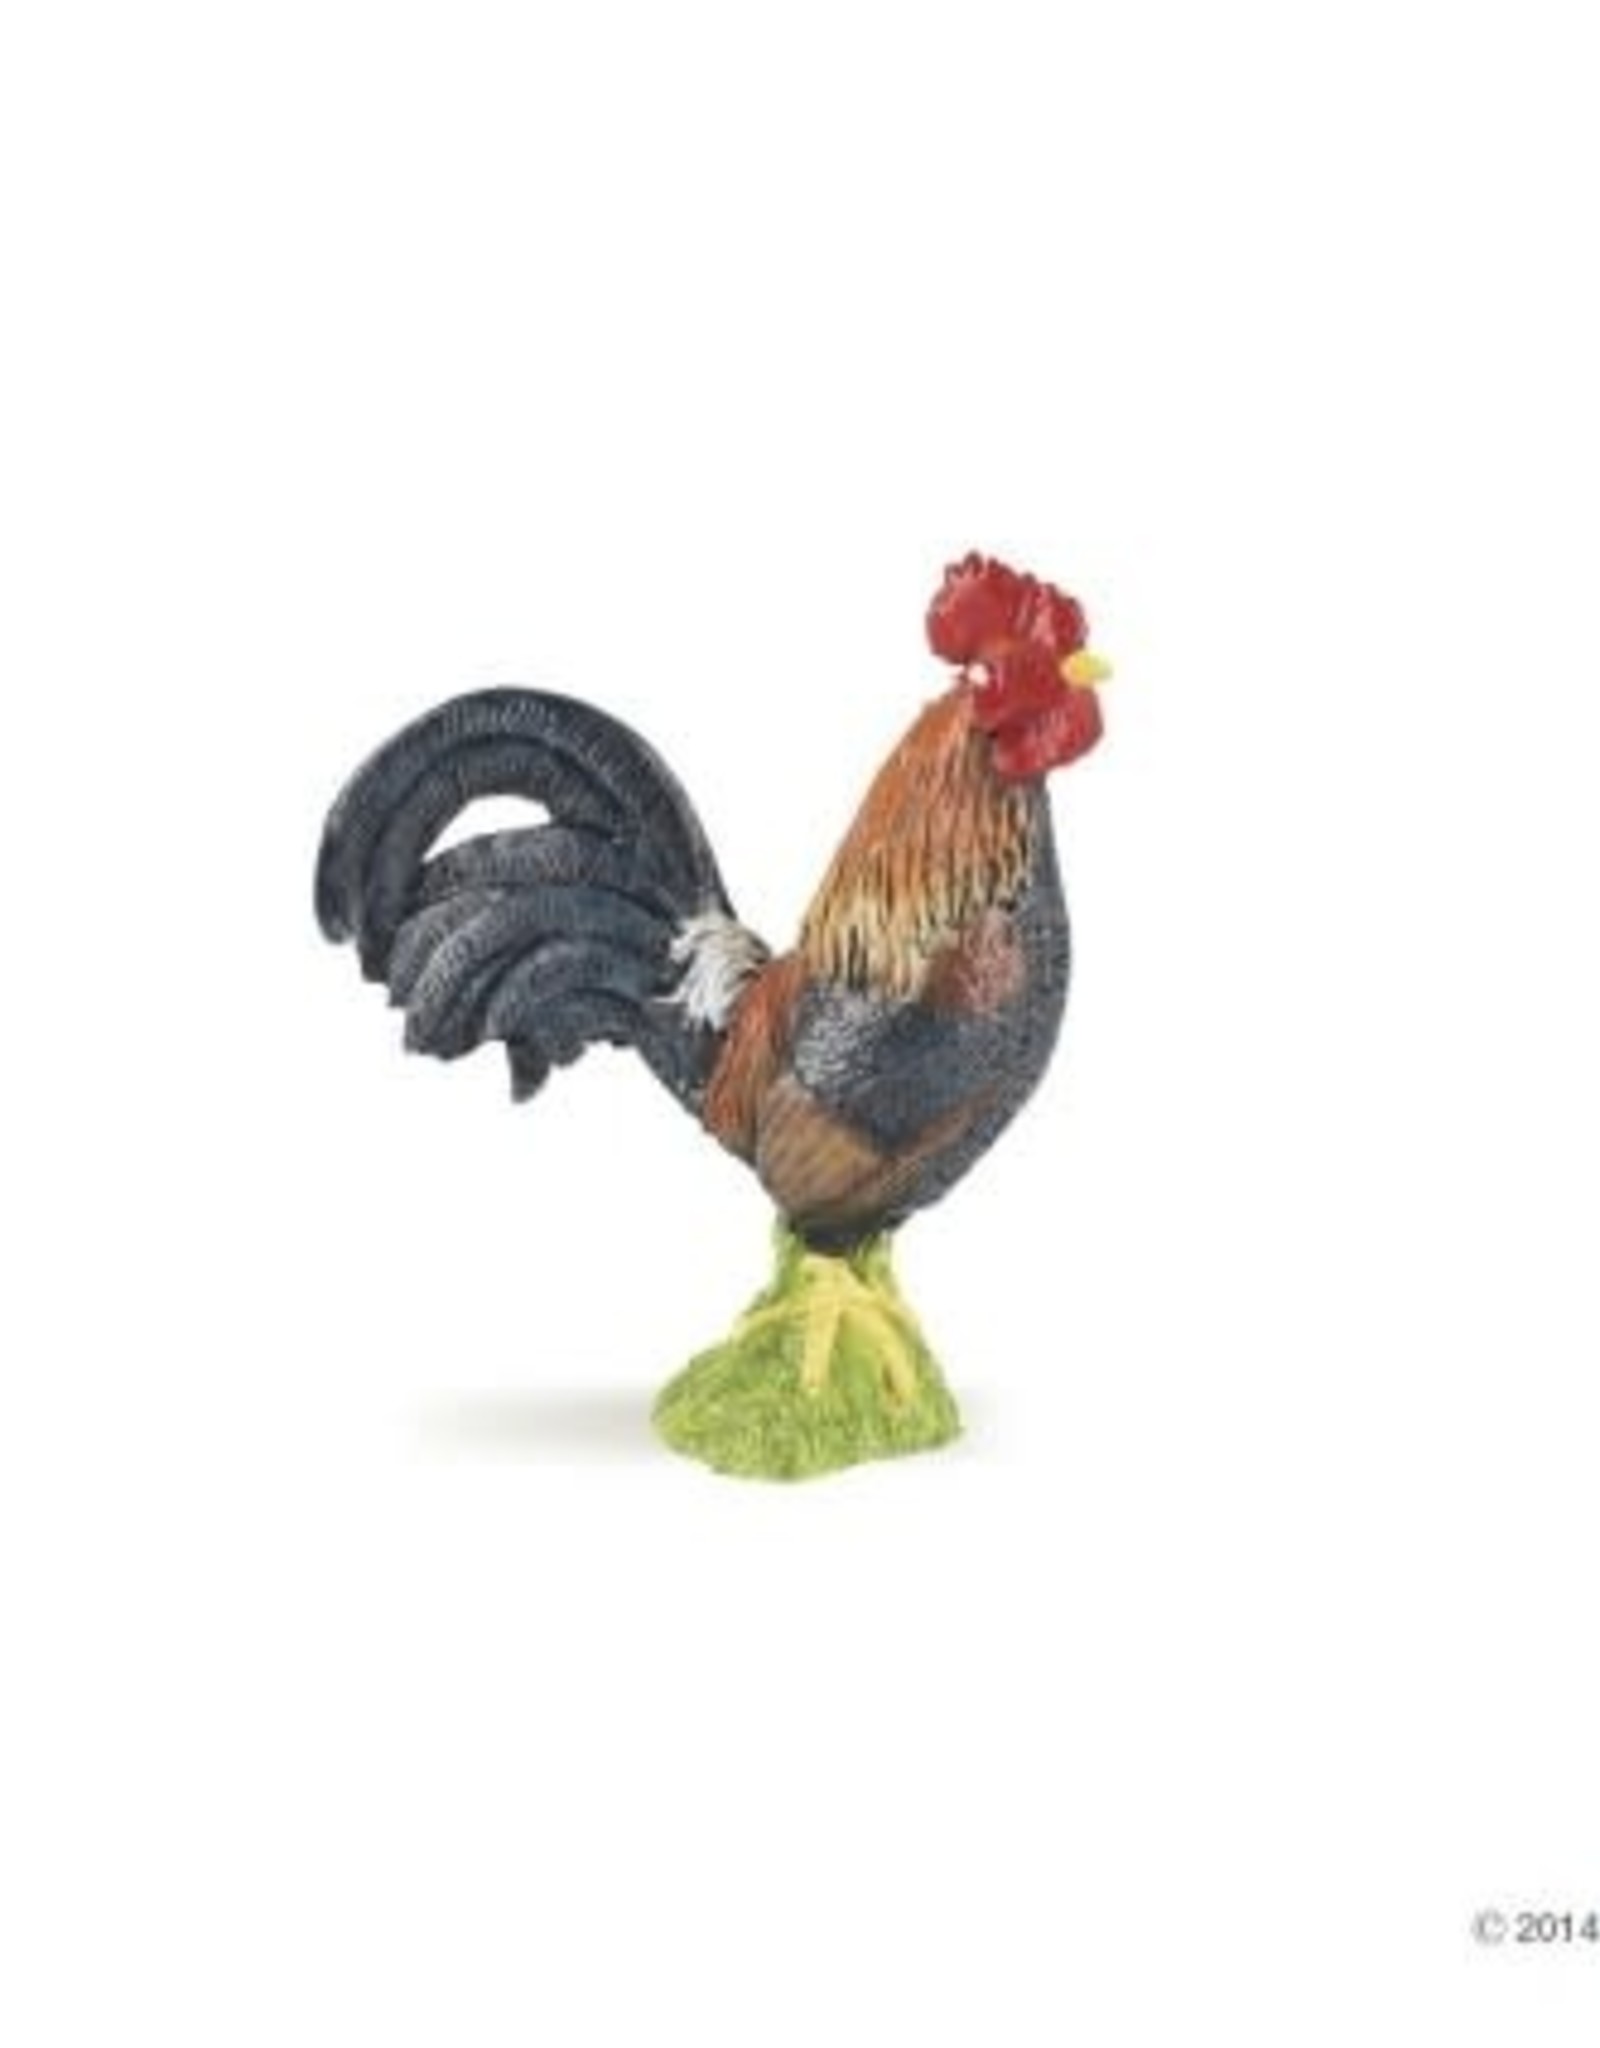 Hotaling PAPO: Gallic Rooster